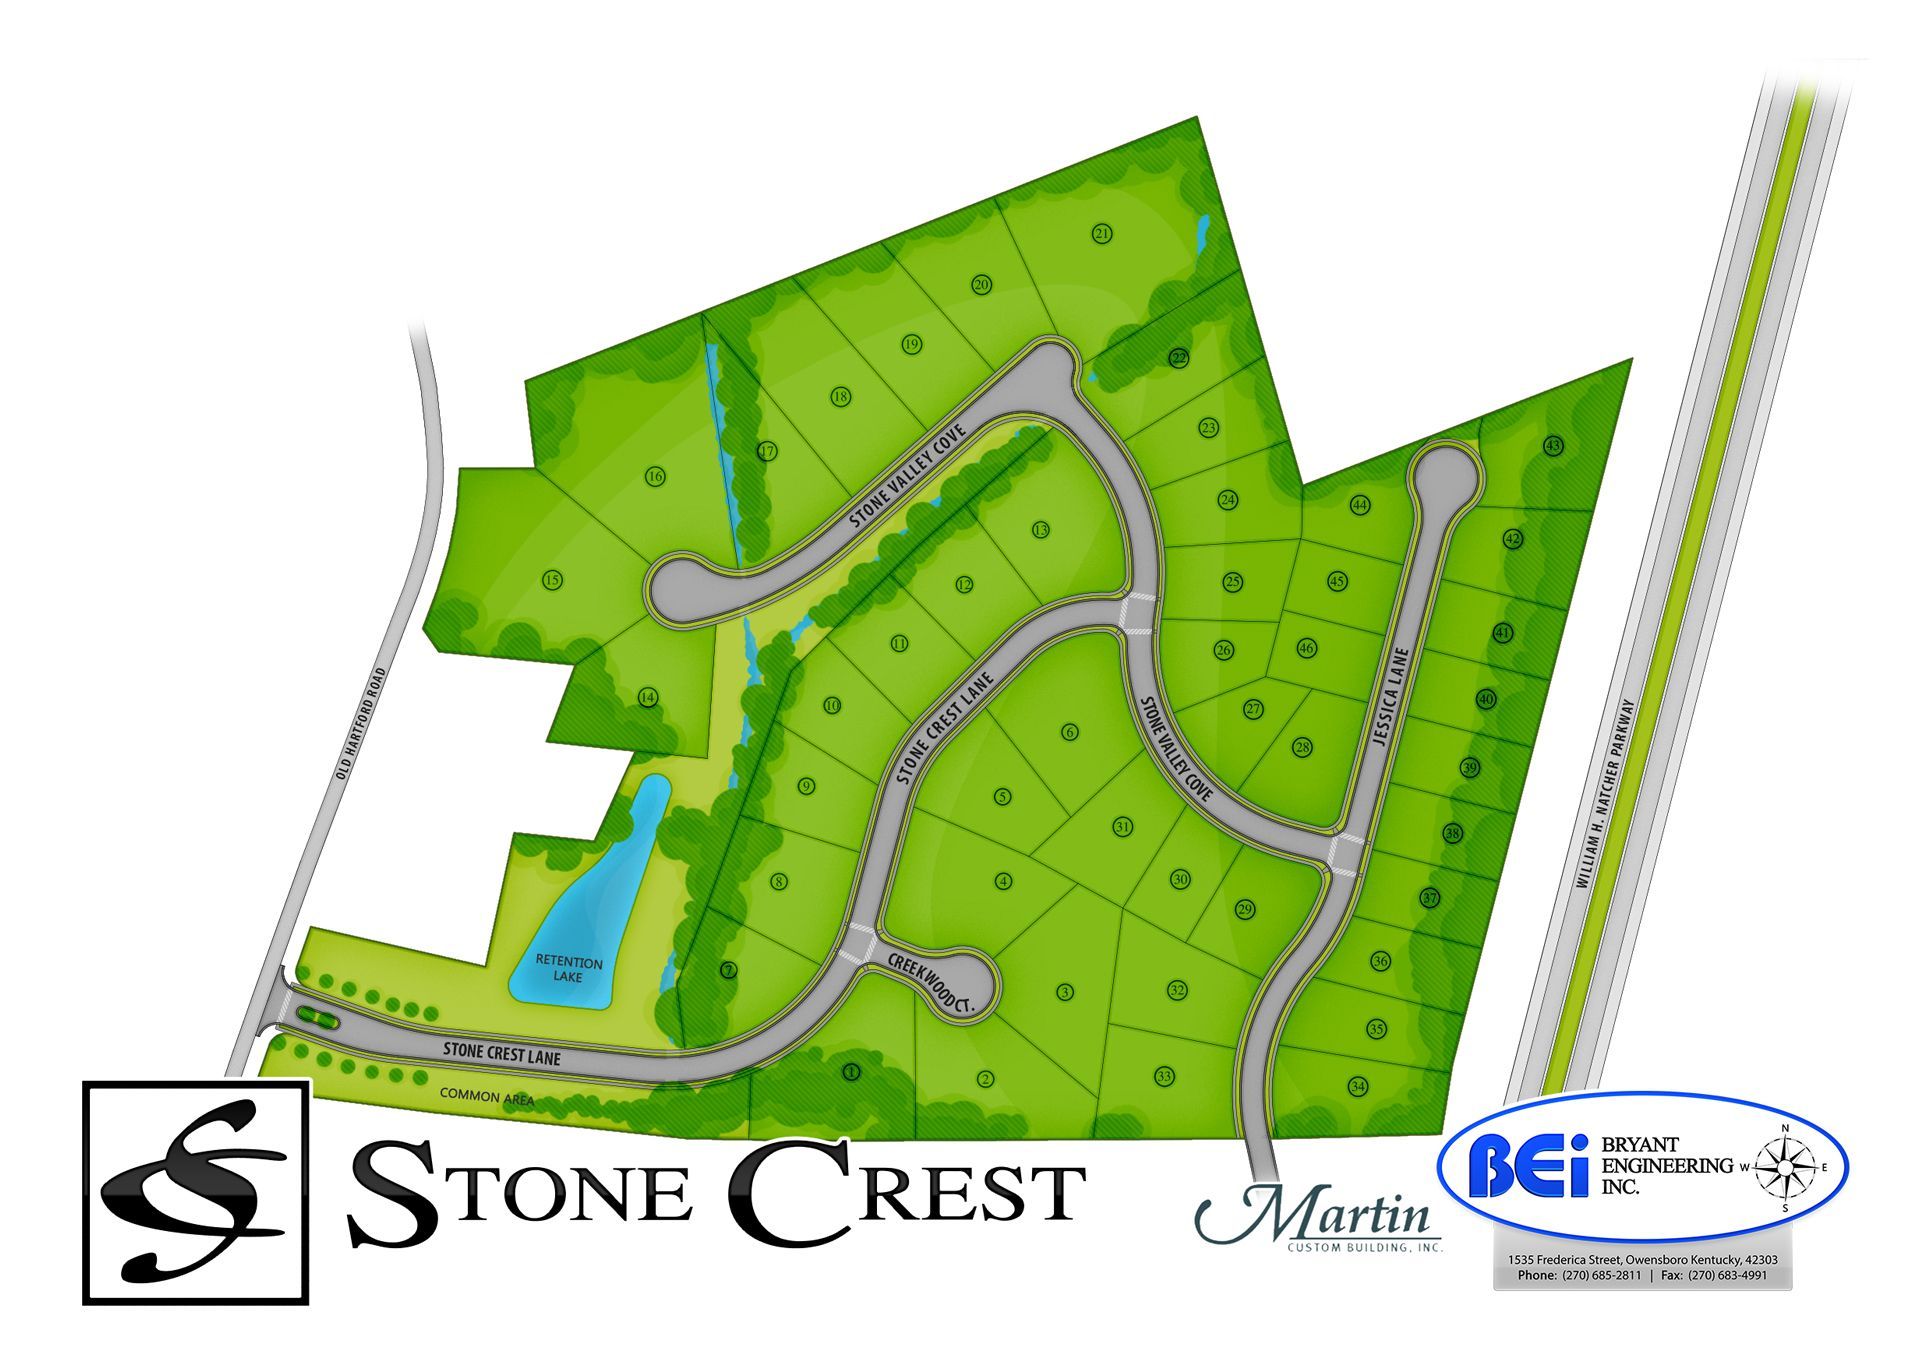 a map of a residential development called stone crest